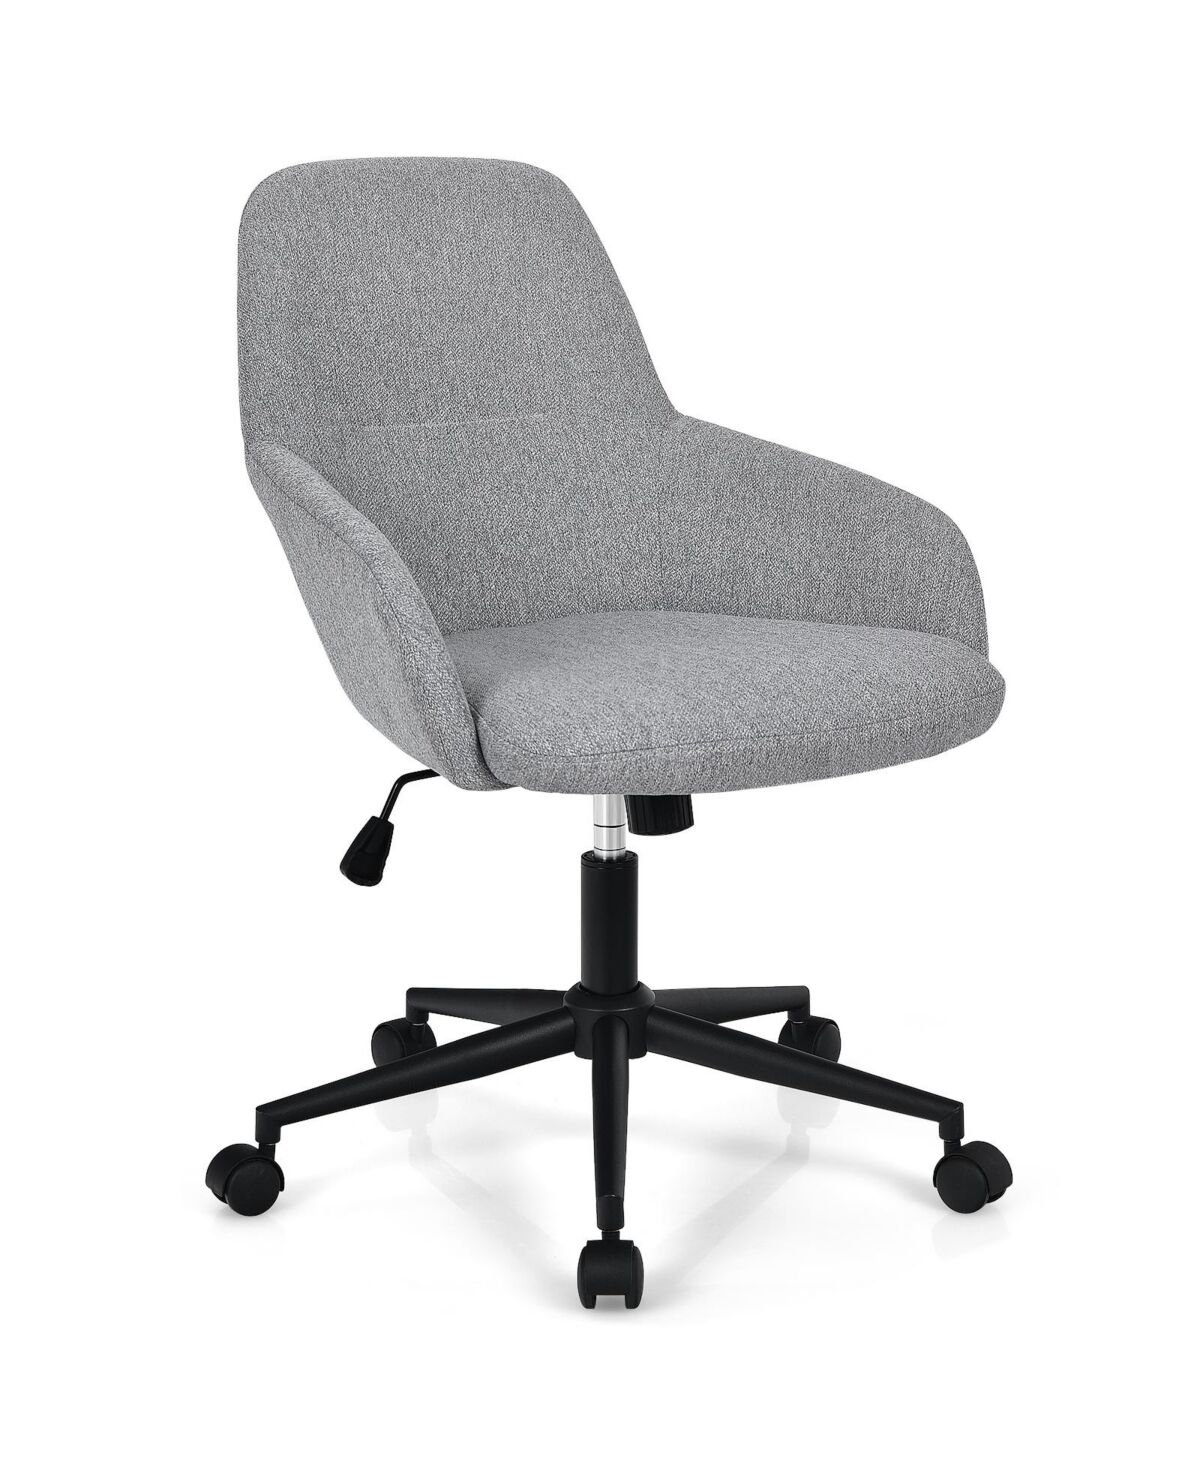 Slickblue Fabric Home Office Chair with Rocking Backres-Grey - Grey